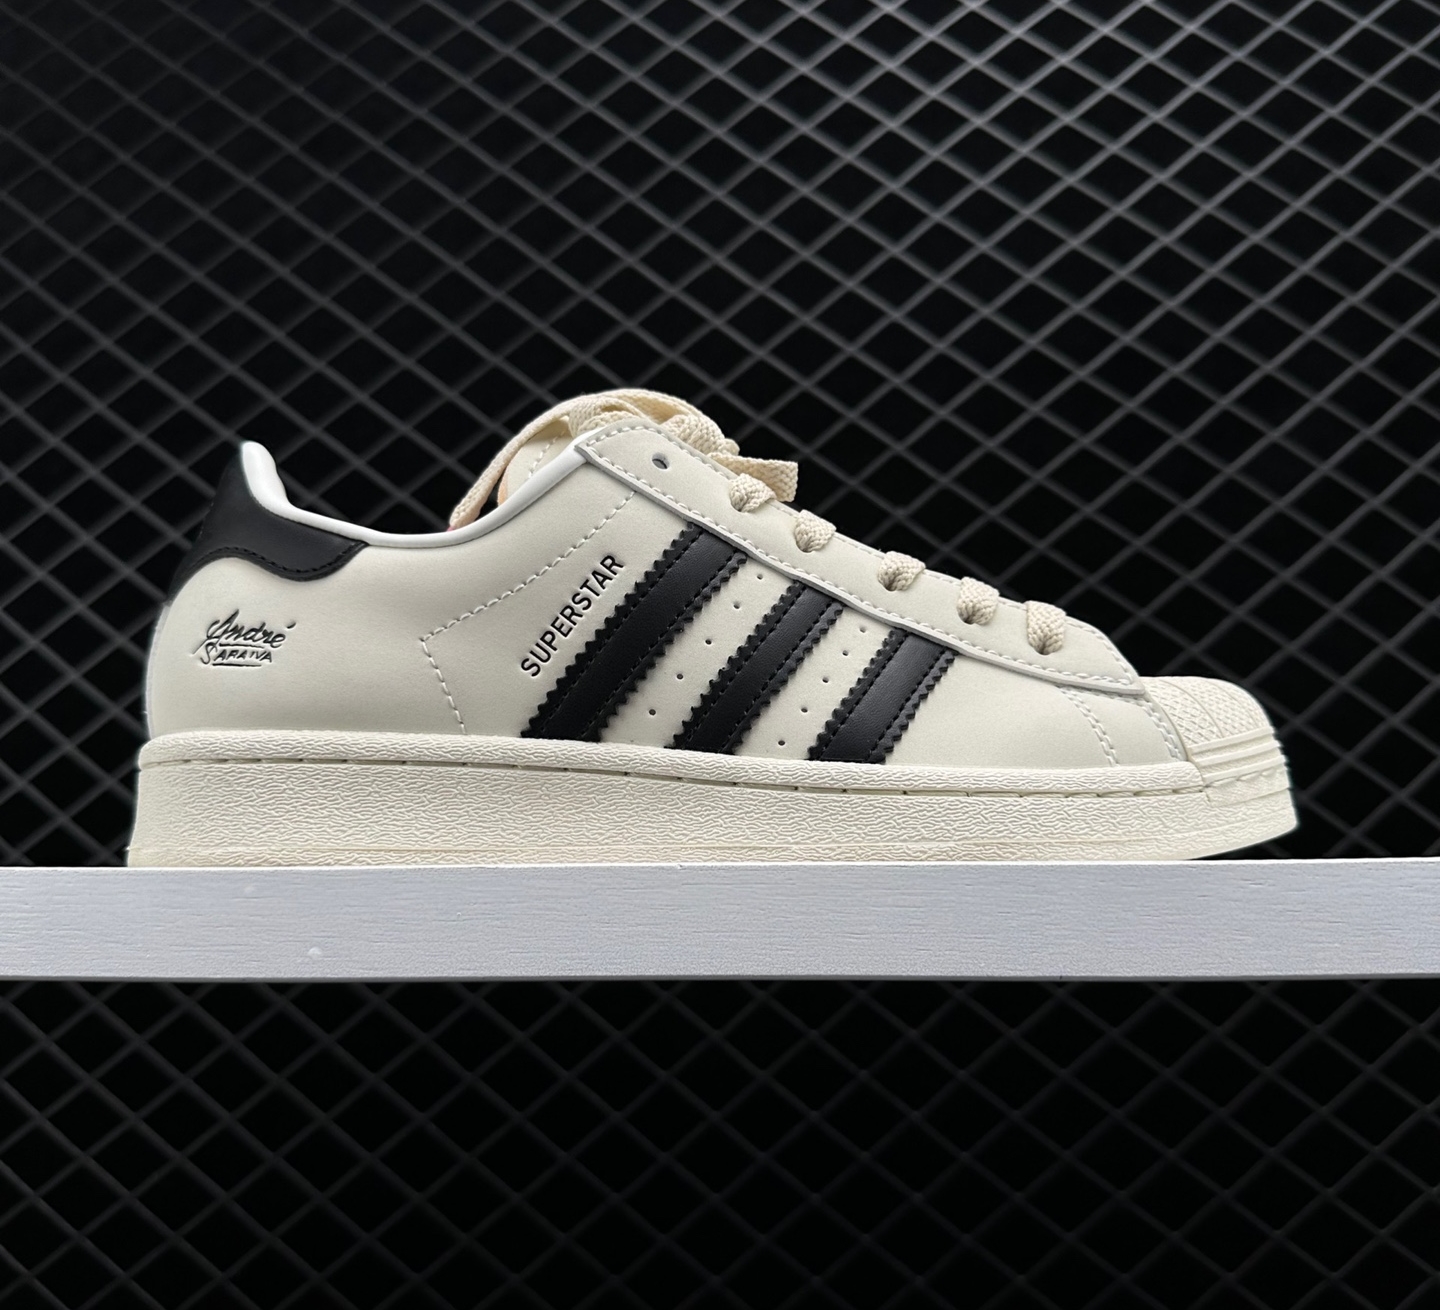 Adidas Superstar Andre Saraiva Chalk White Black GZ2203 - Stylish and Classic Sneakers